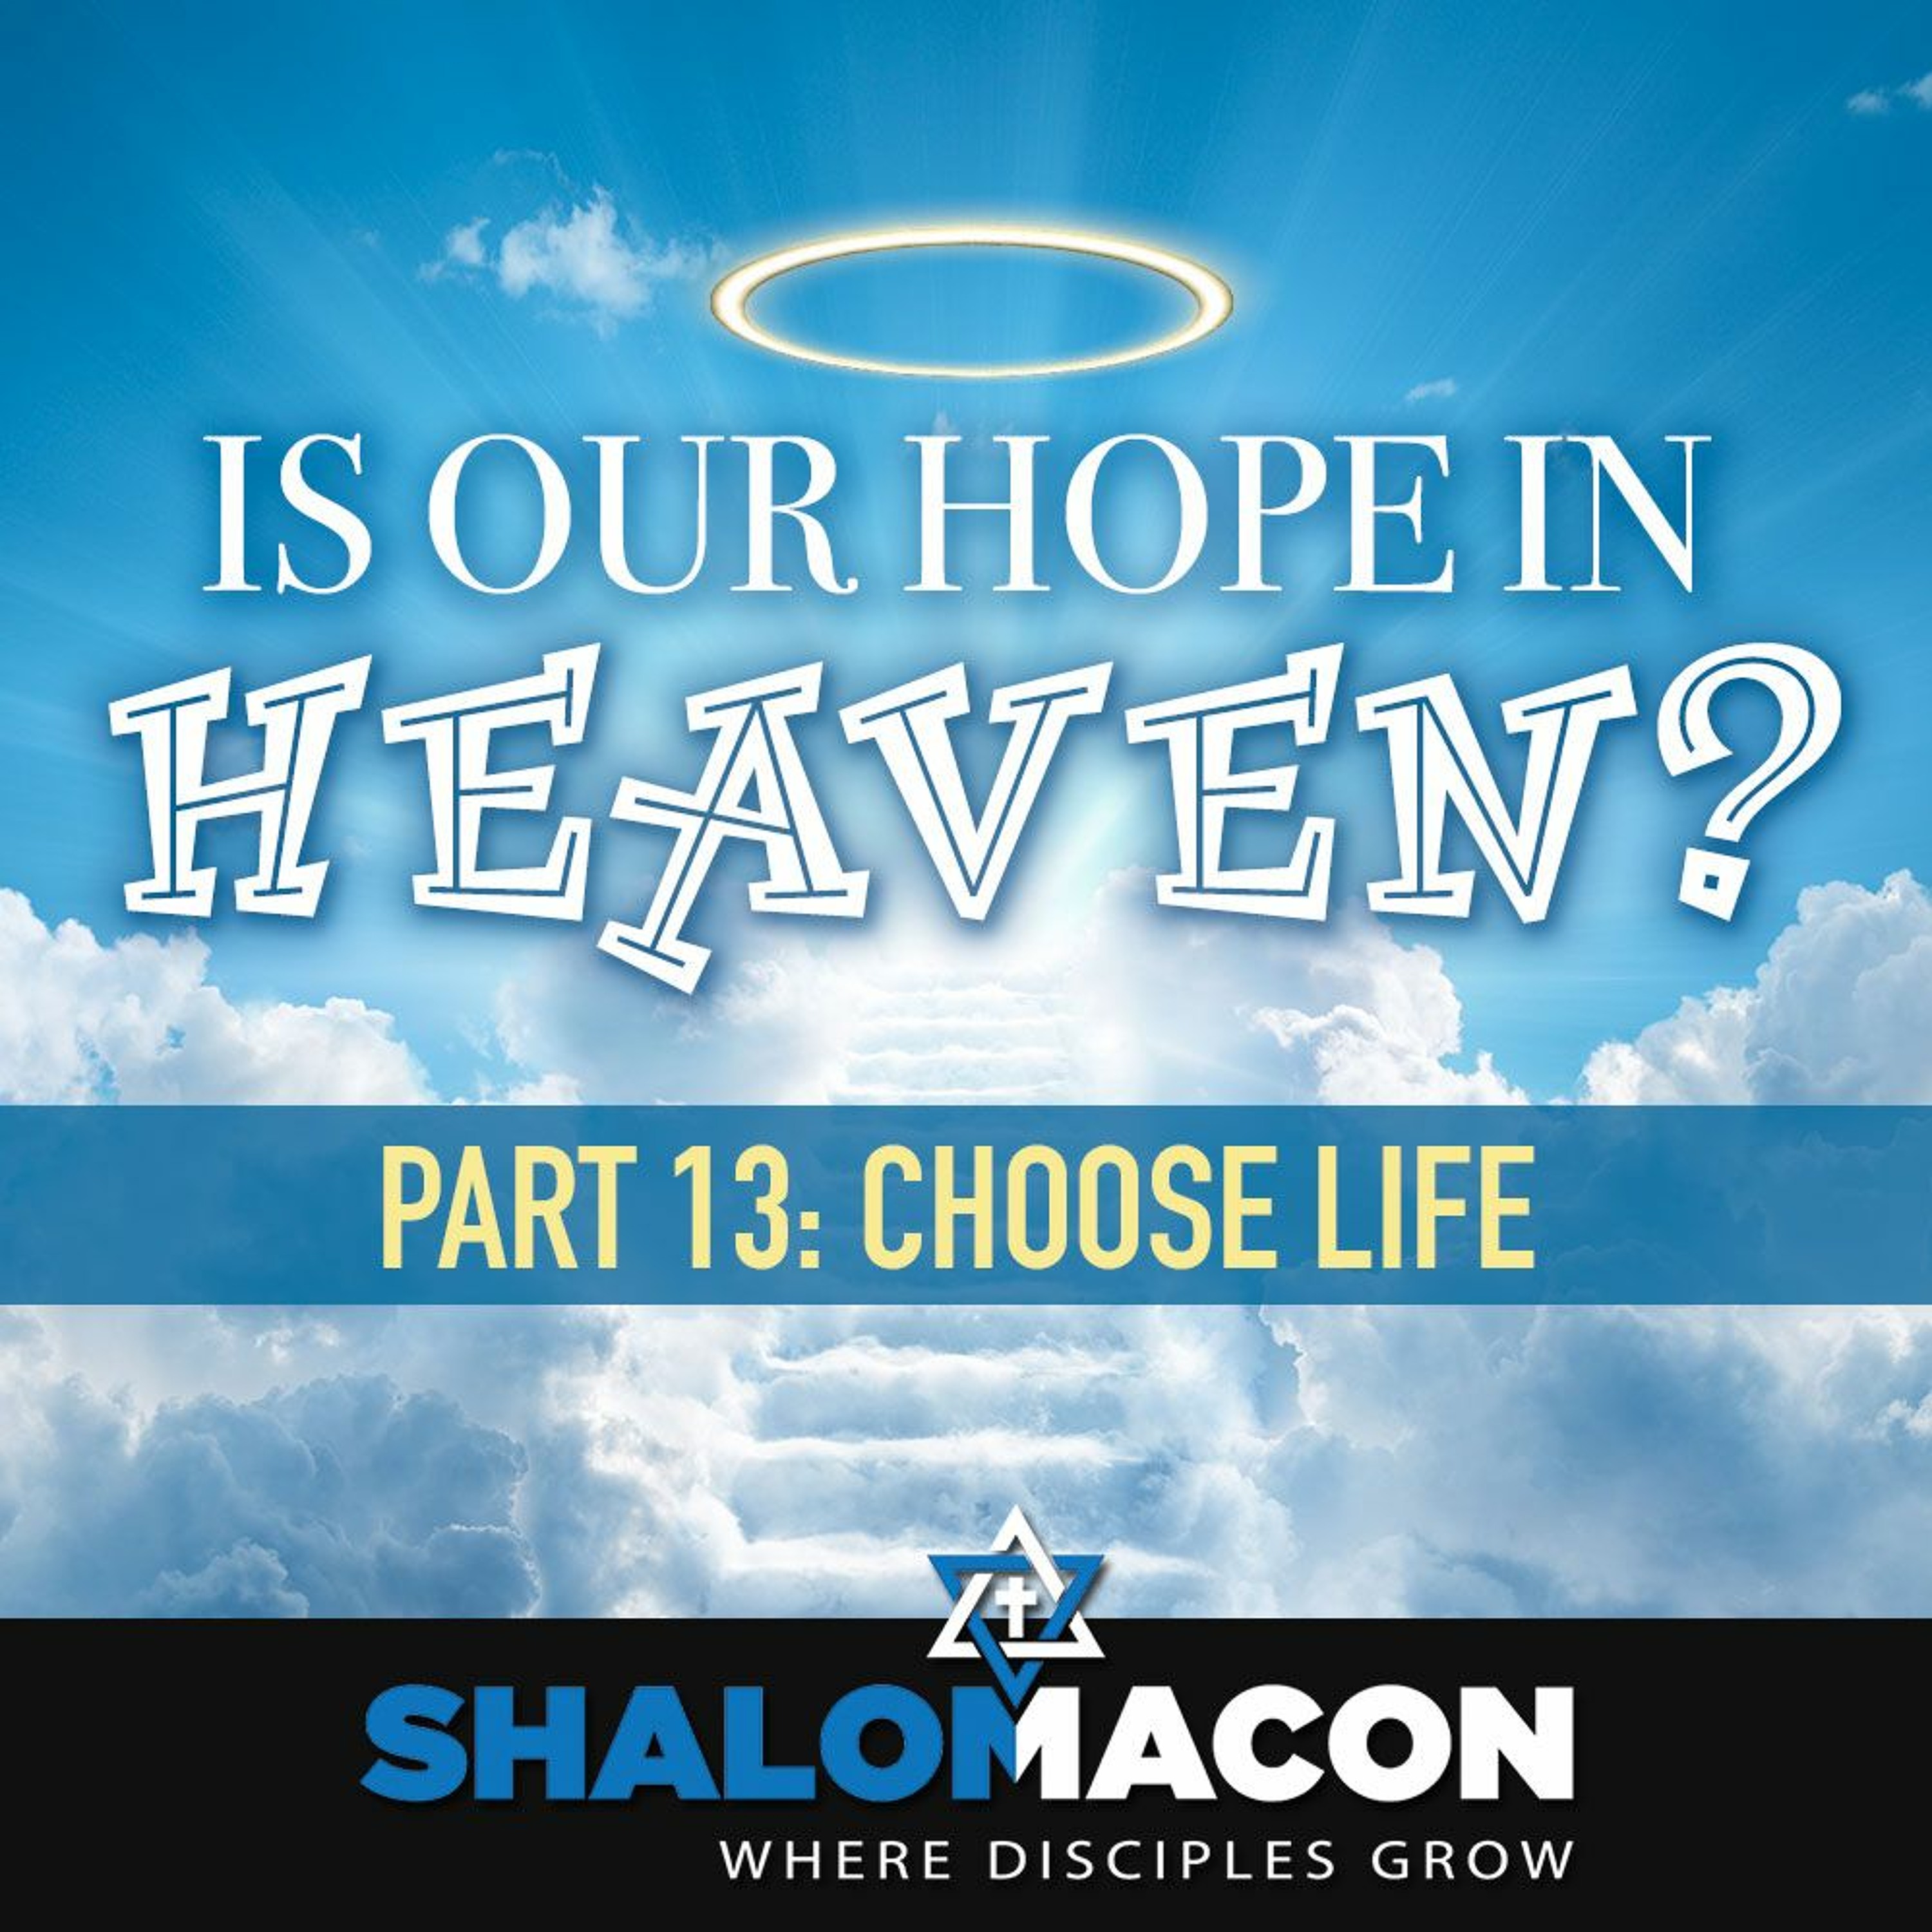 Is Our Hope In Heaven? - Part 13: Choose Life